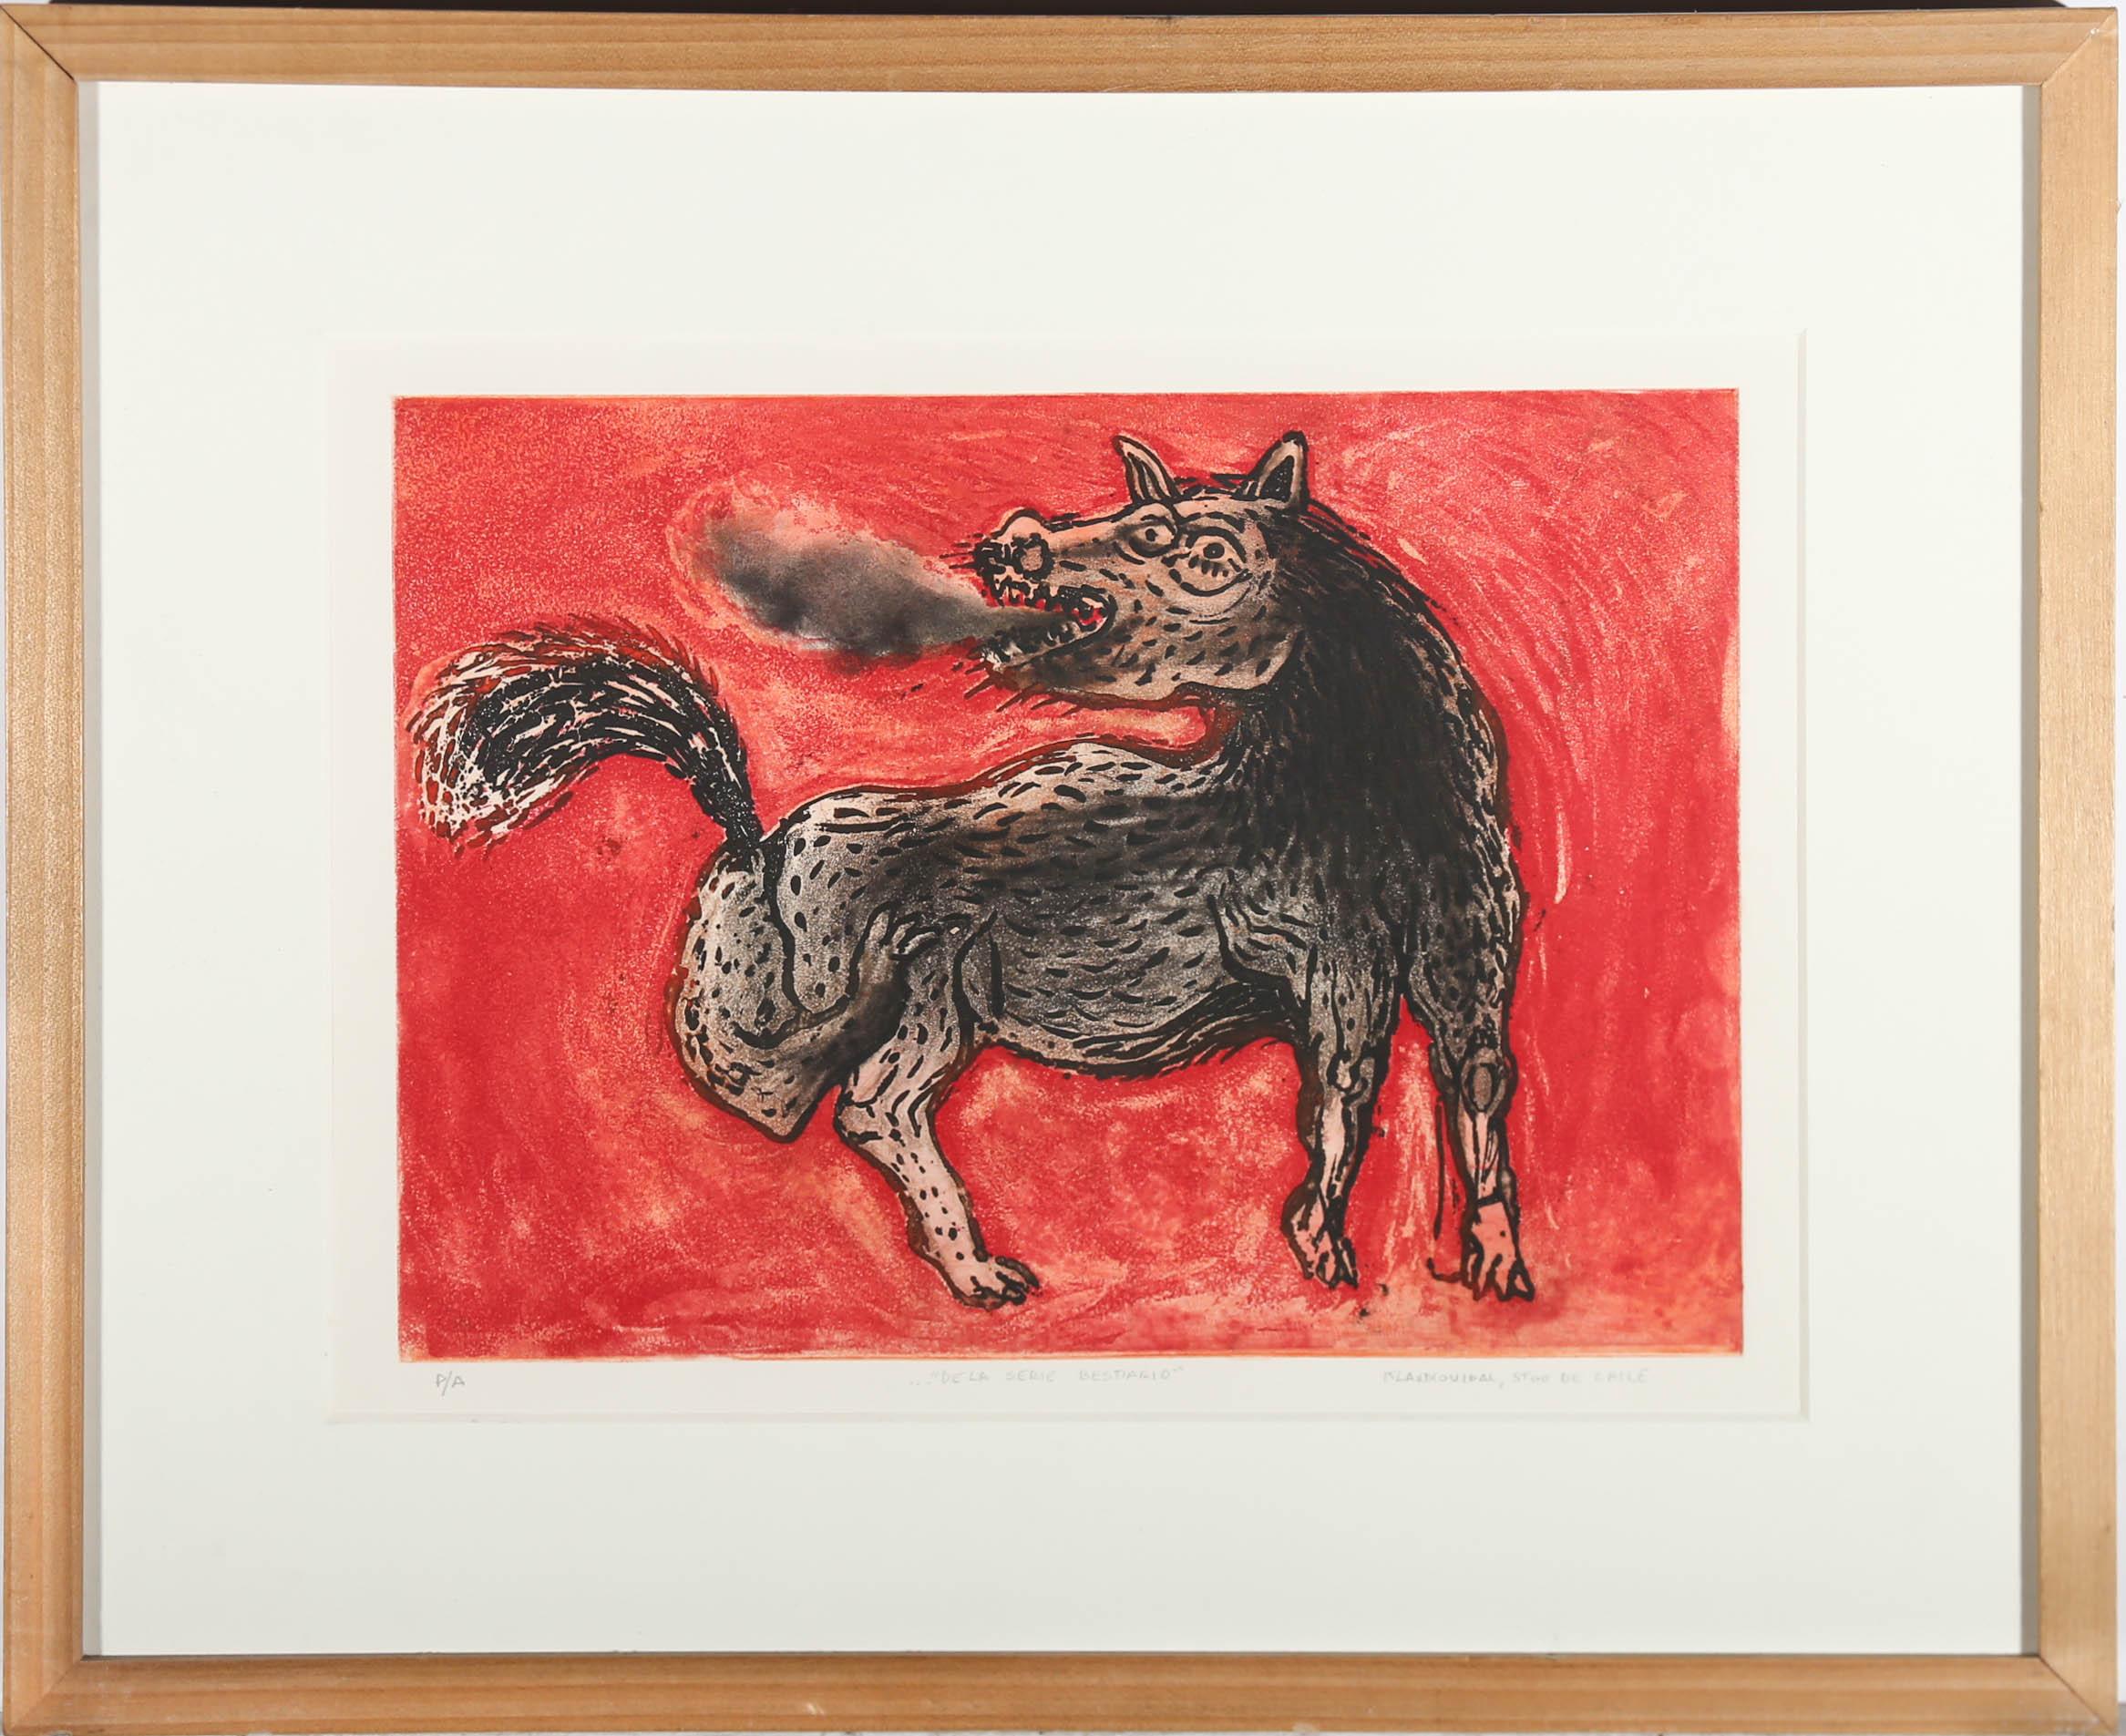 A fun, vibrant aquatint etching depicting a smoke breathing beast-like canine on a red background. Signed and titled below the plate line. Artist proof. Presented in a light wooden frame. On paper. 
